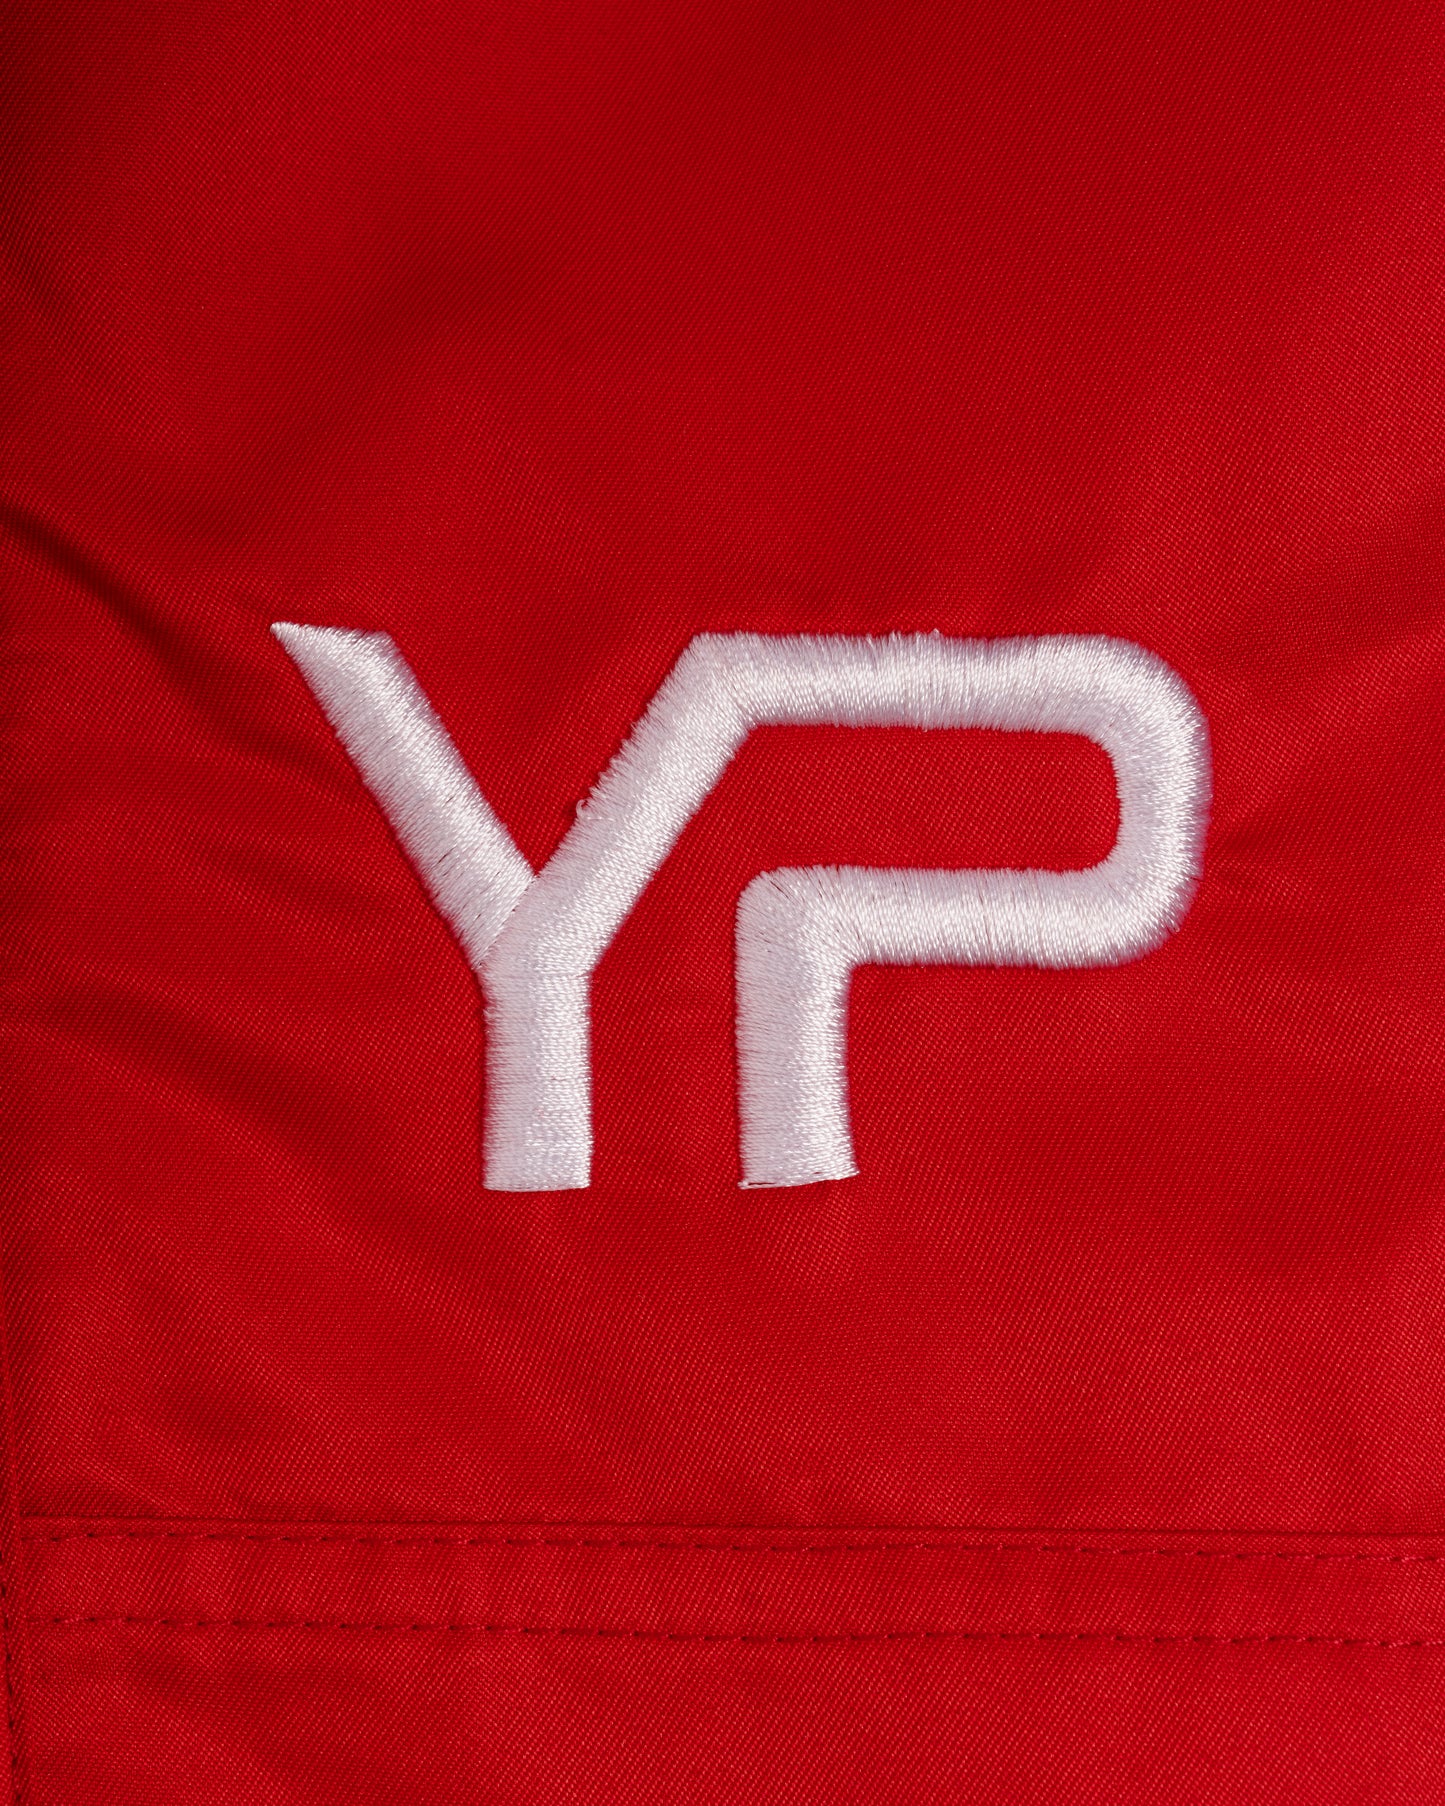 YP OVERSIZE STACKED RED TRACKPANTS